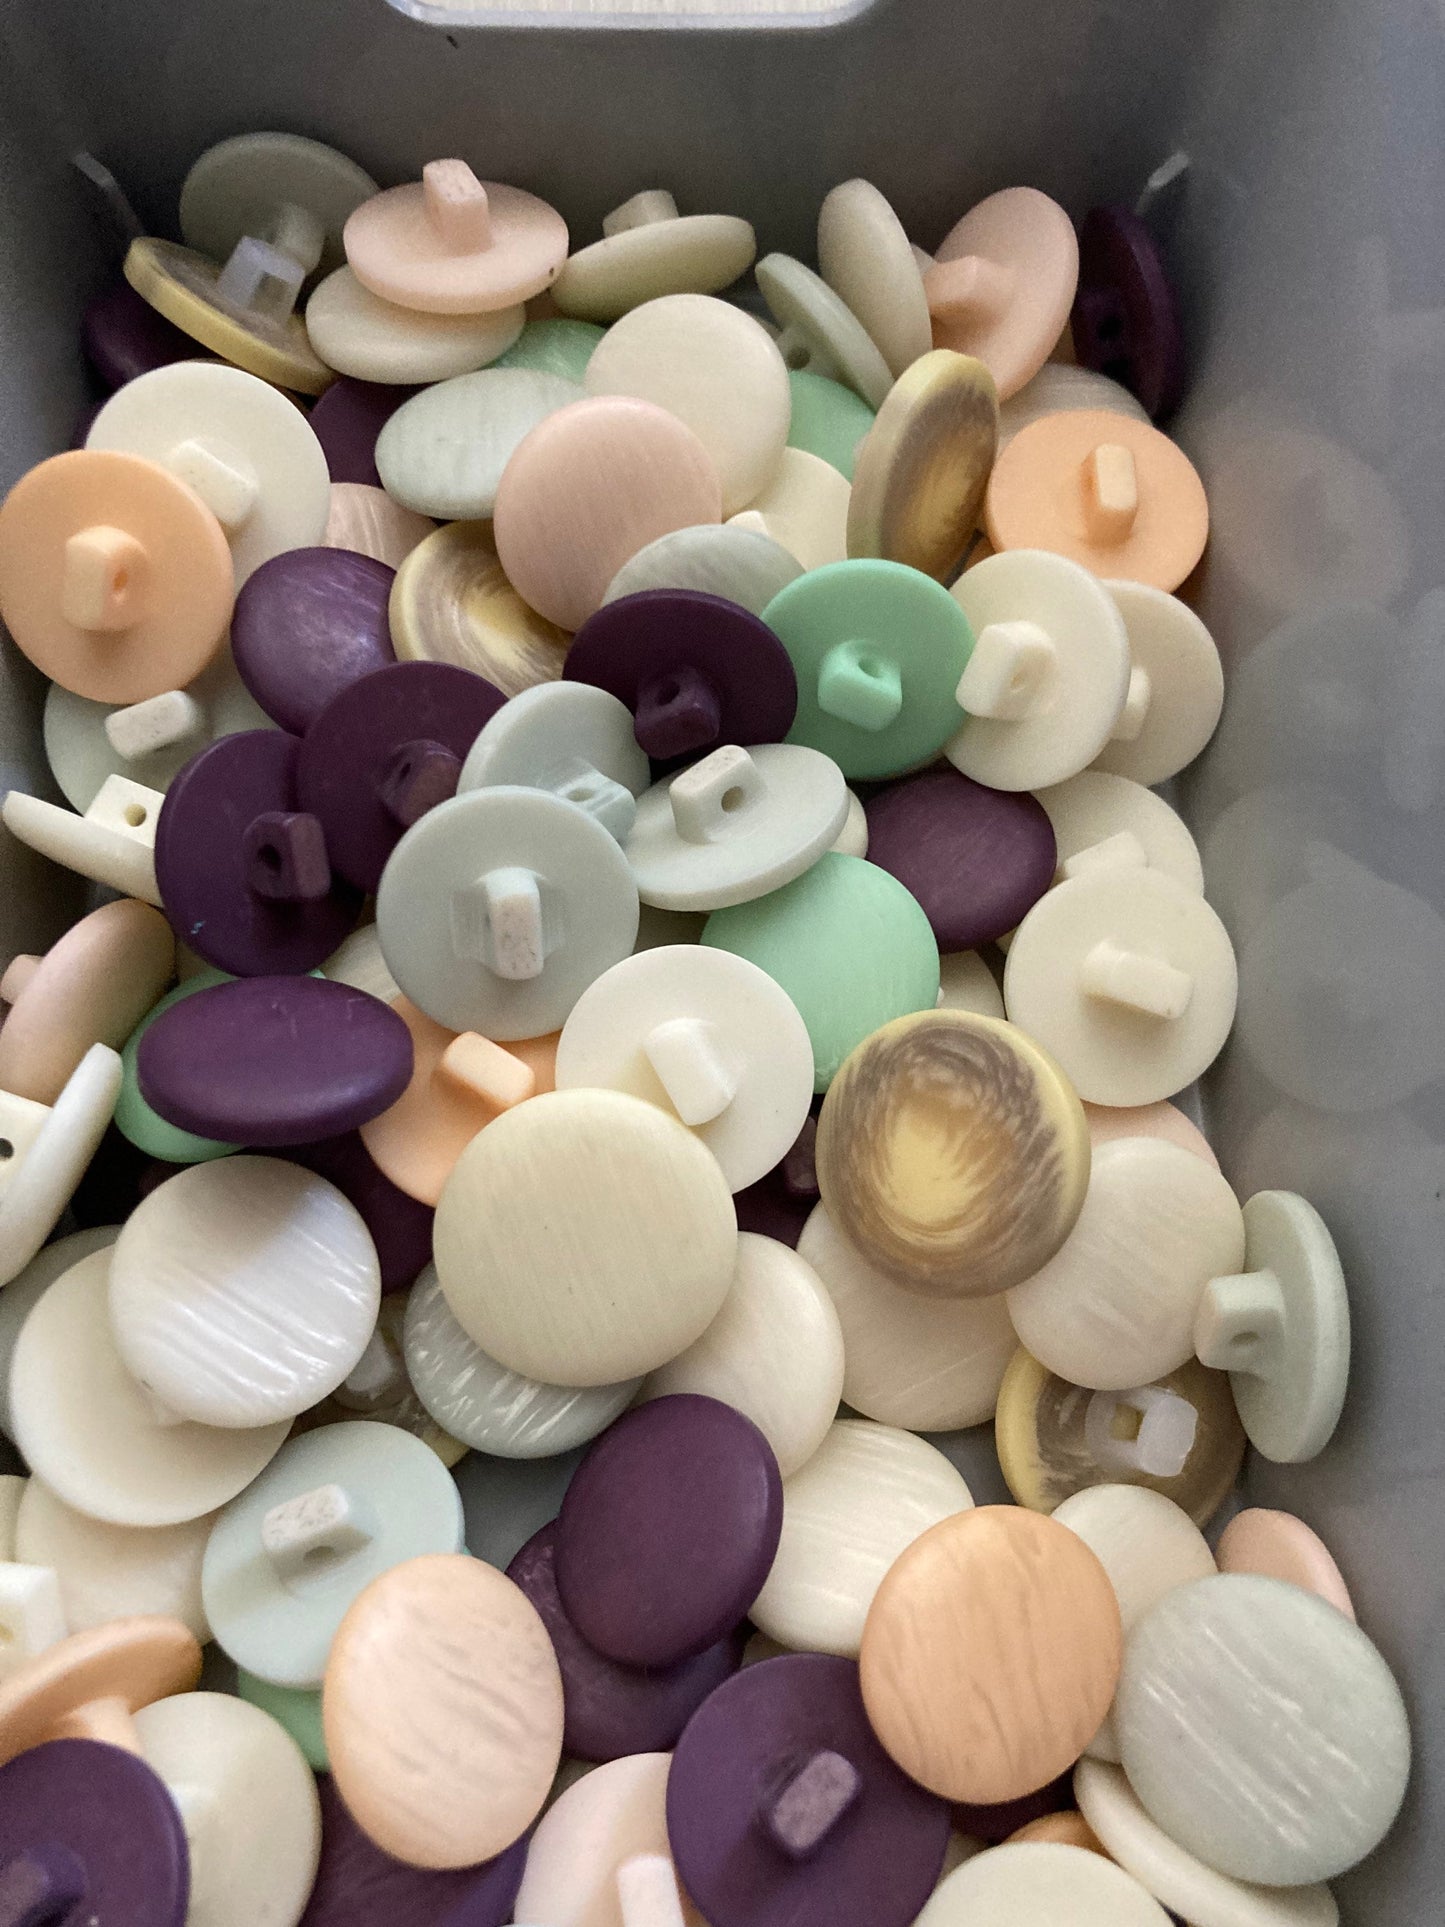 Job lot 18mm plastic buttons in cream violet and purple mint green pink 195 gms